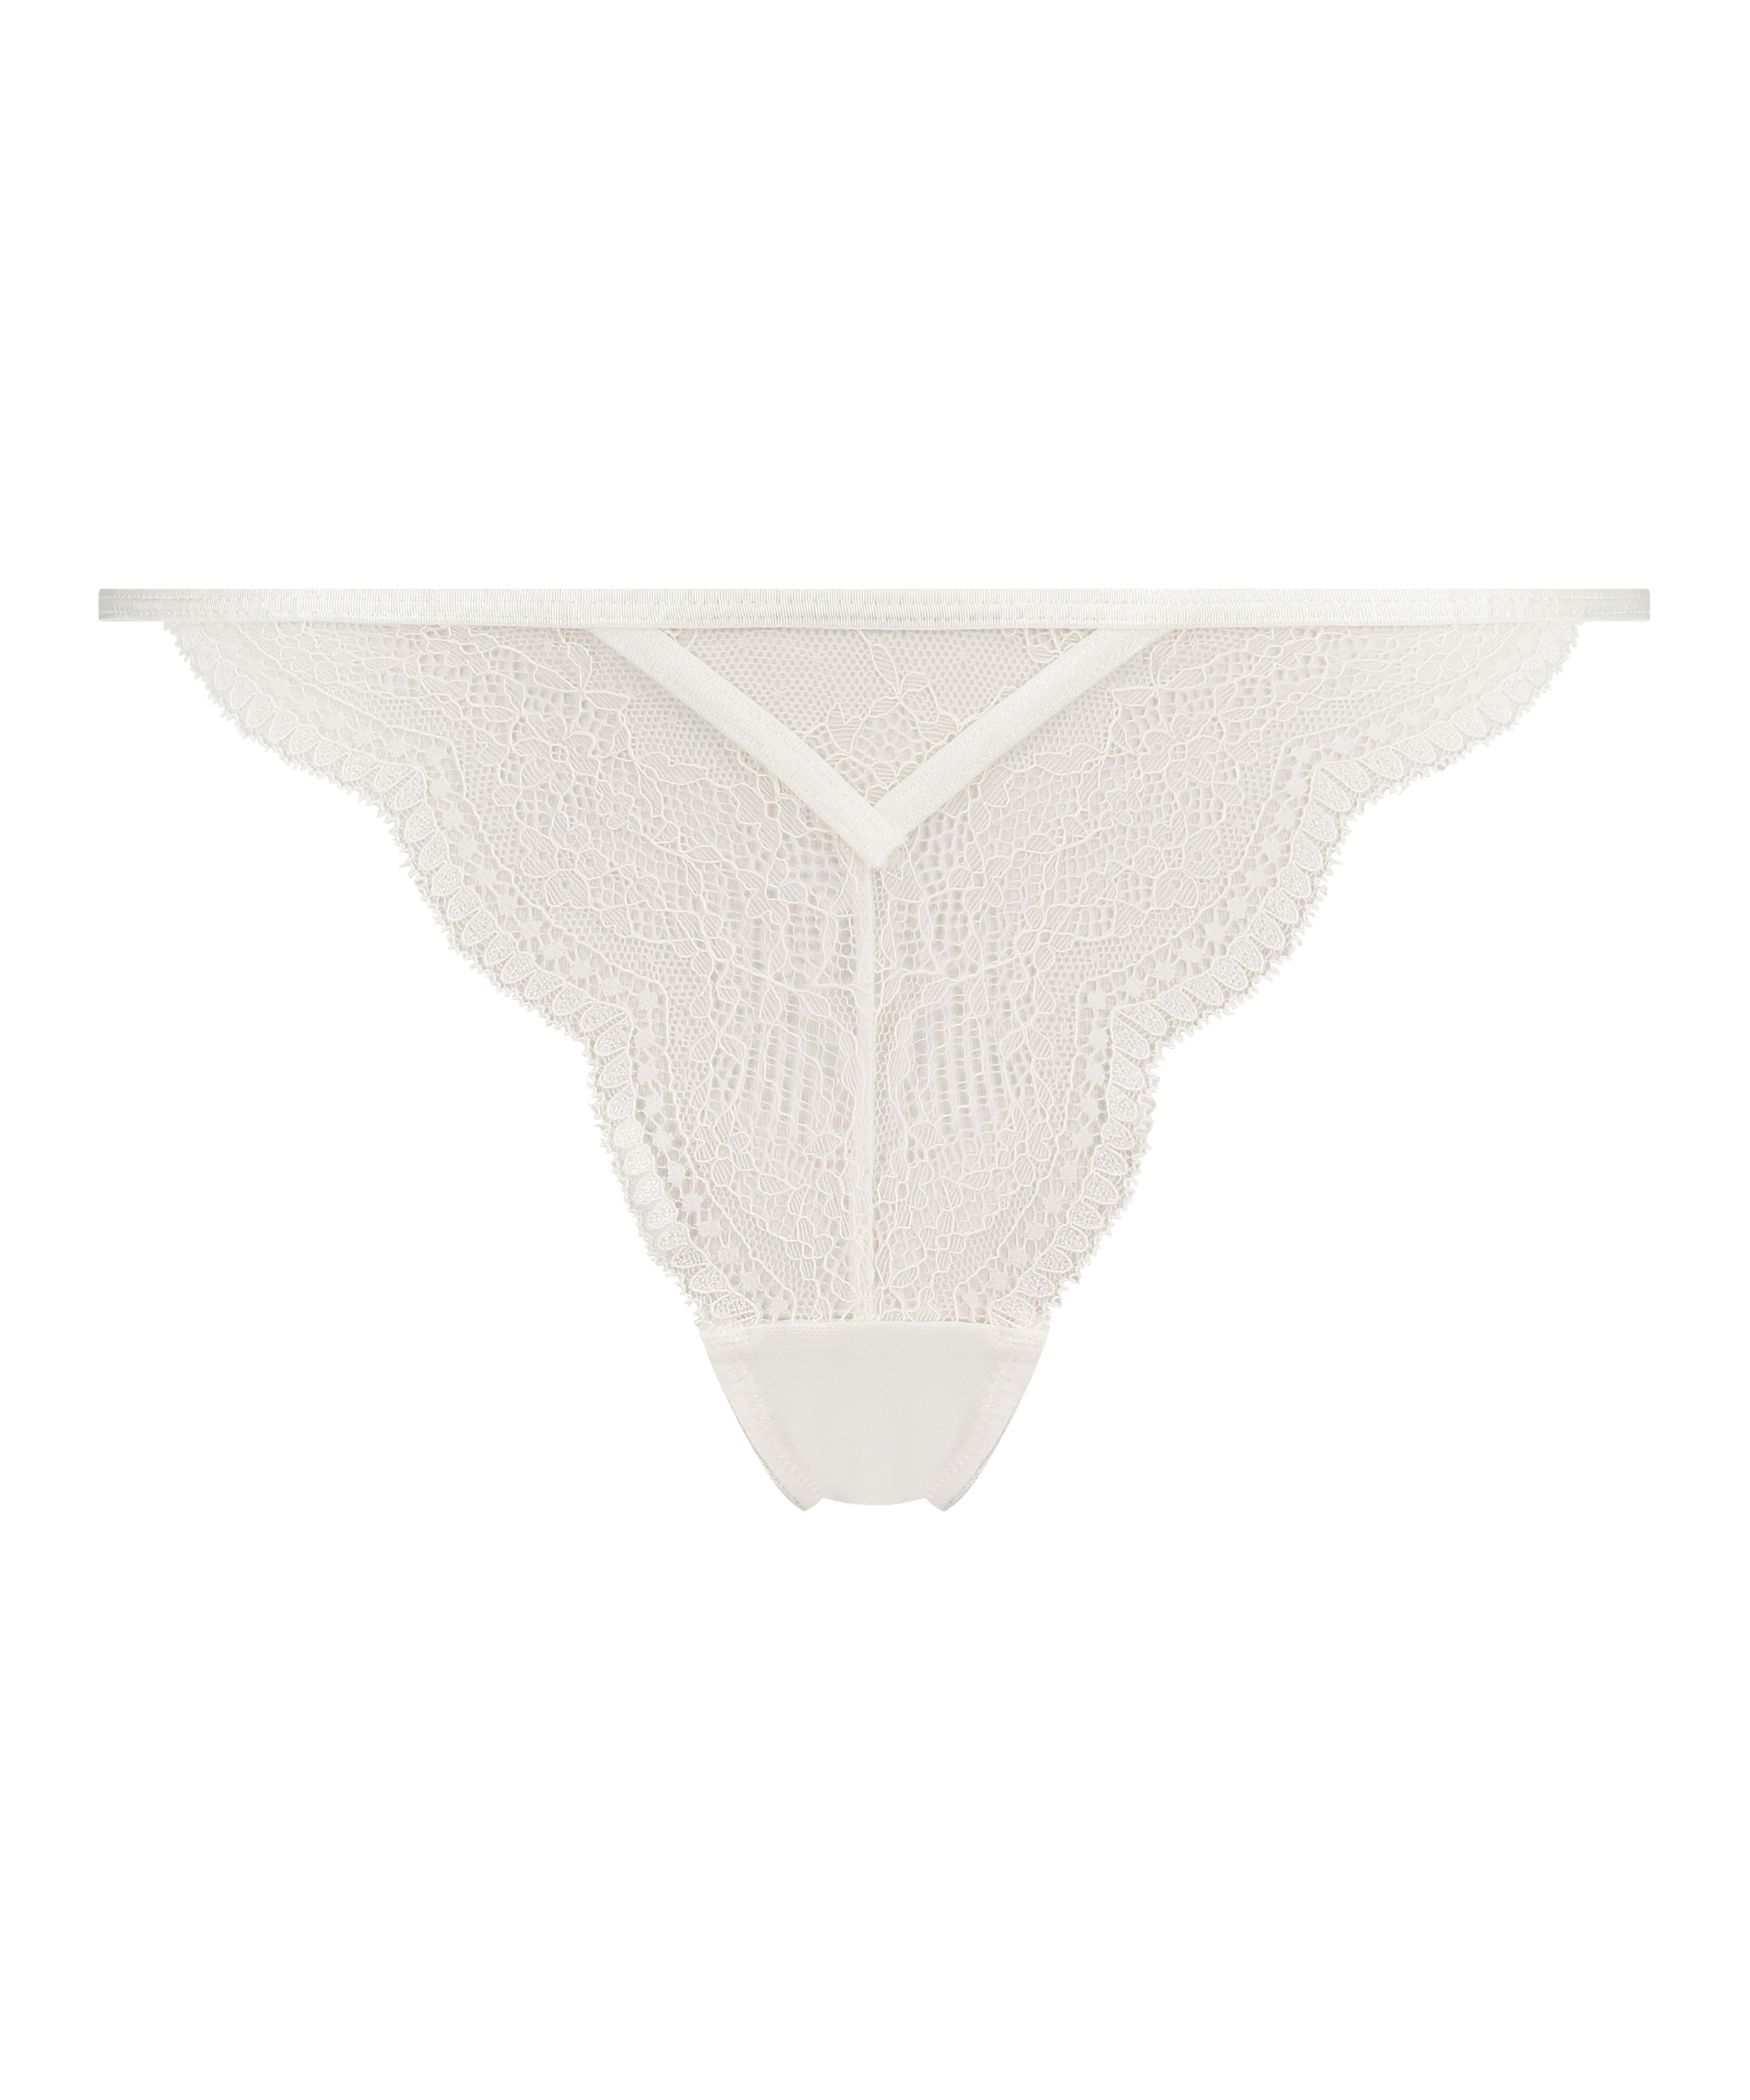 Thong Isabelle, White, main